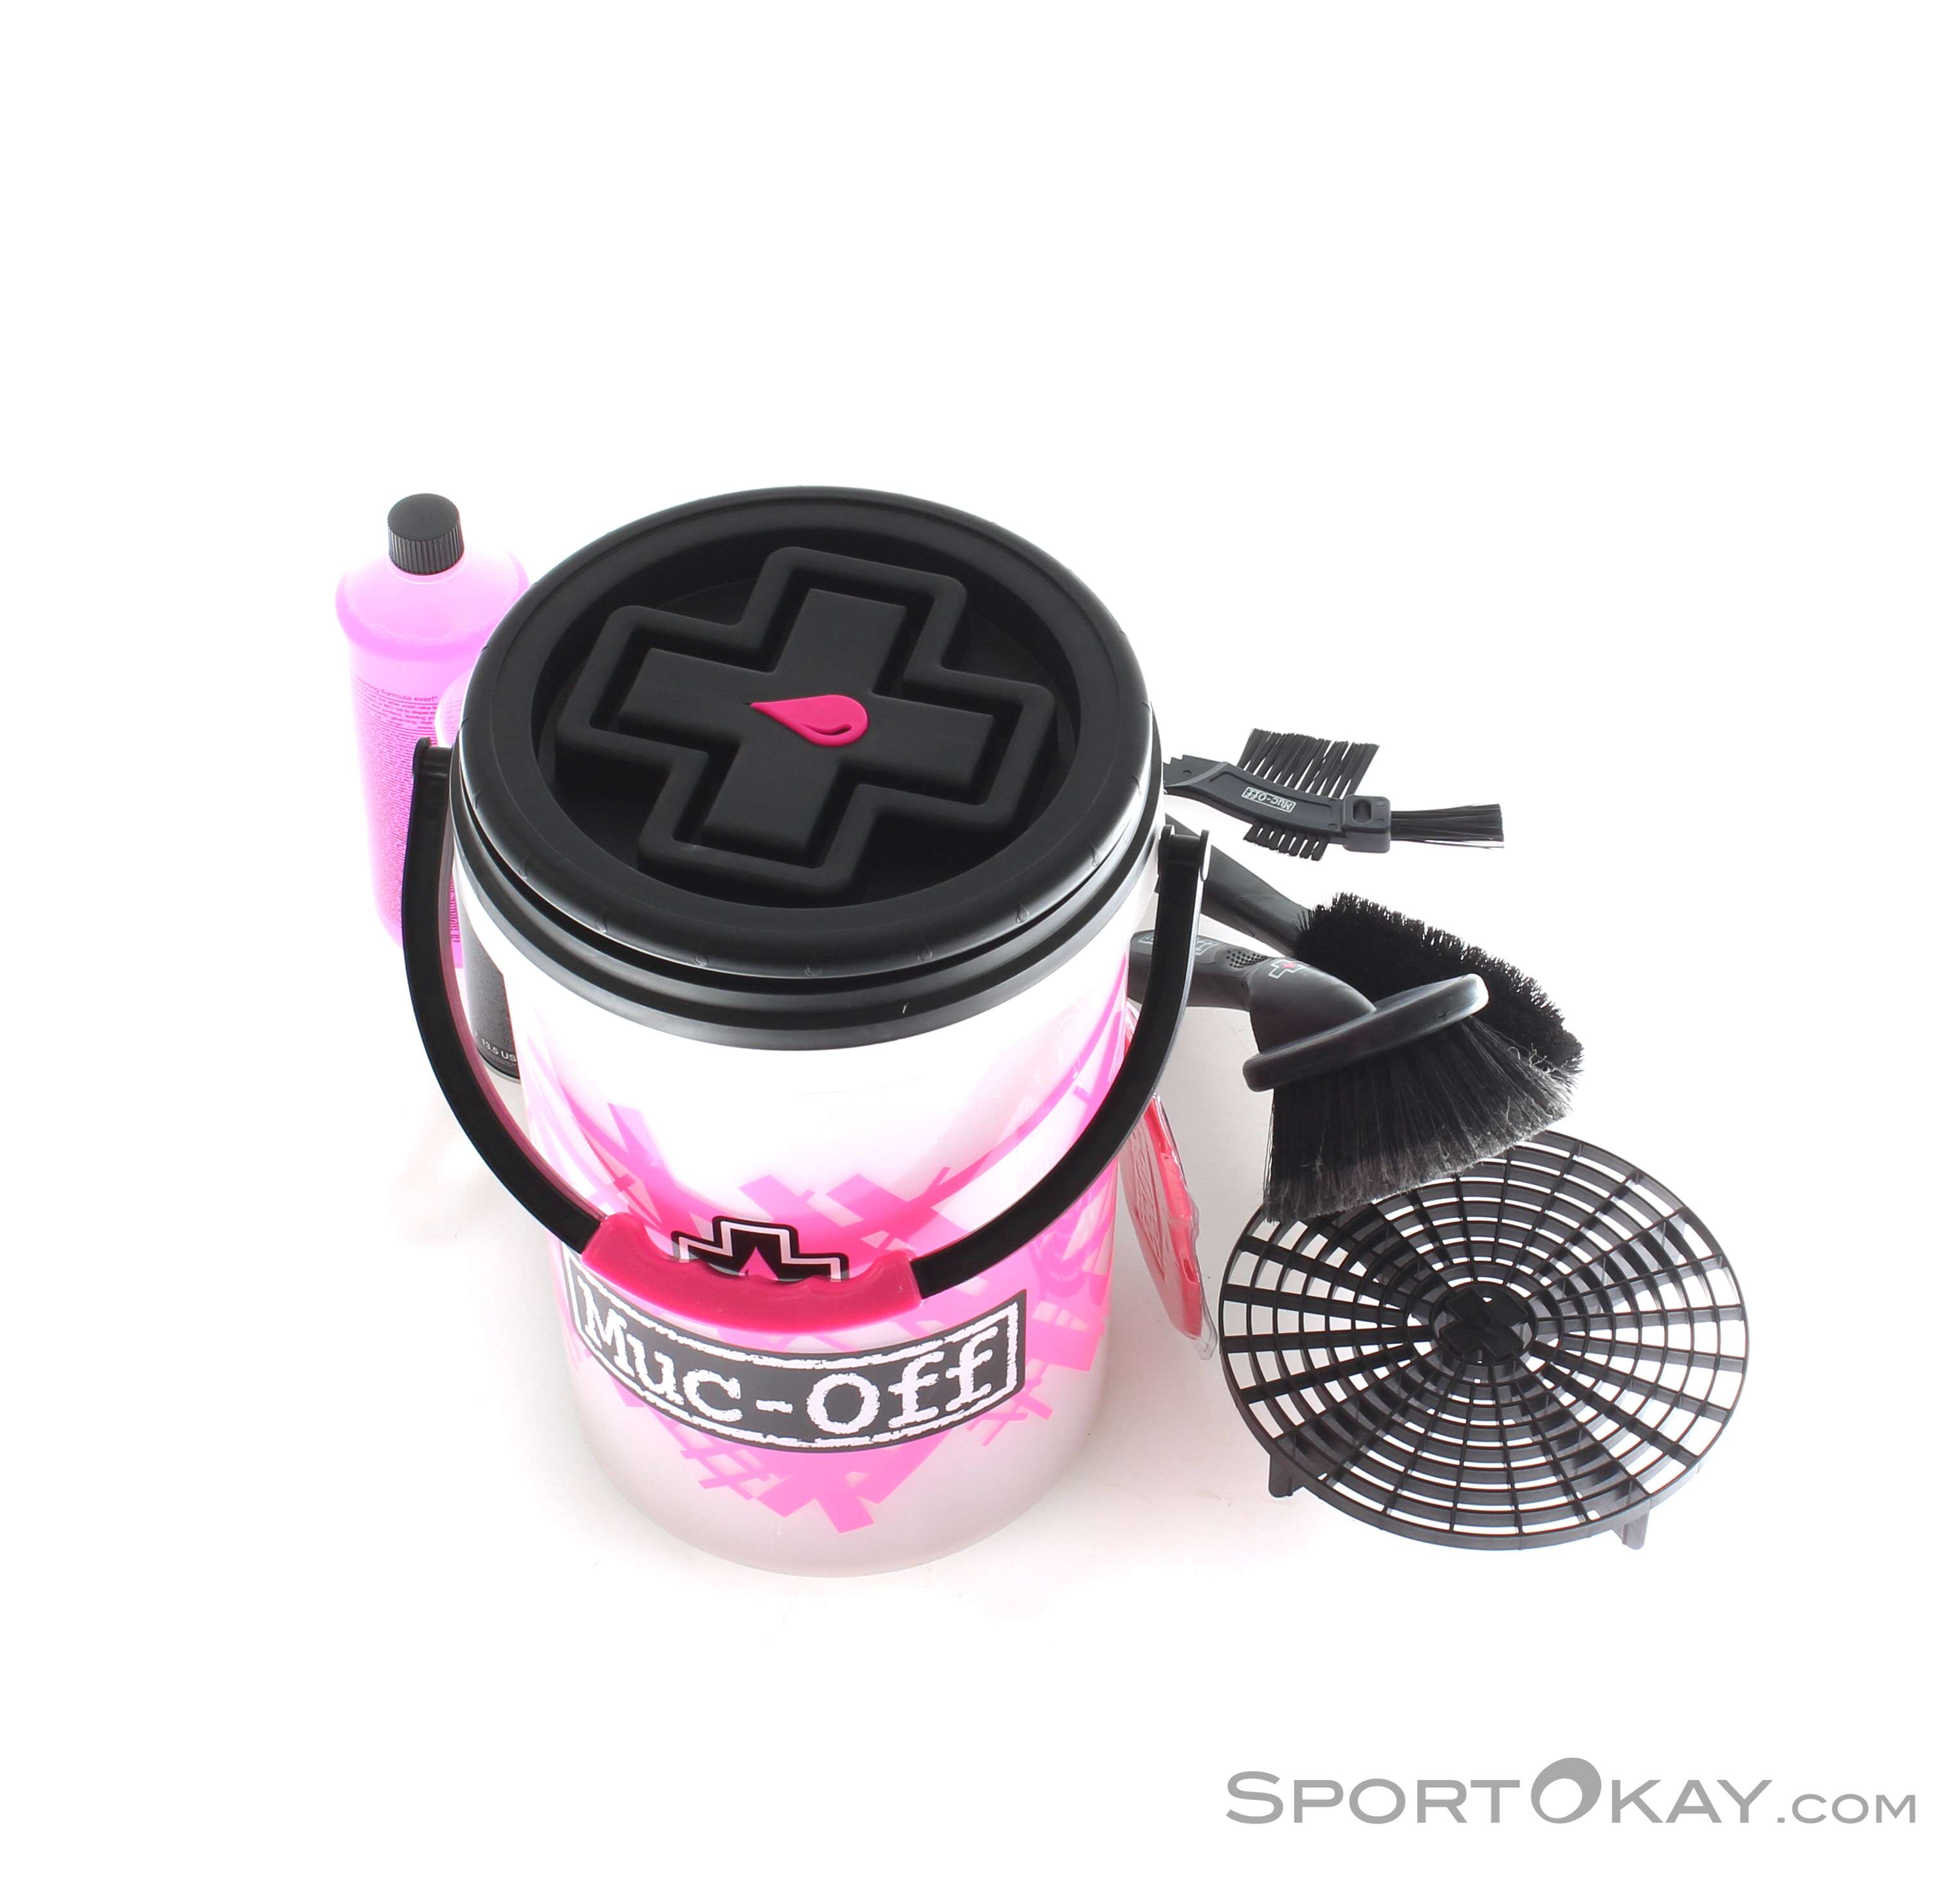 Muc-Off Dirt Bucket Kit with Filth Filter